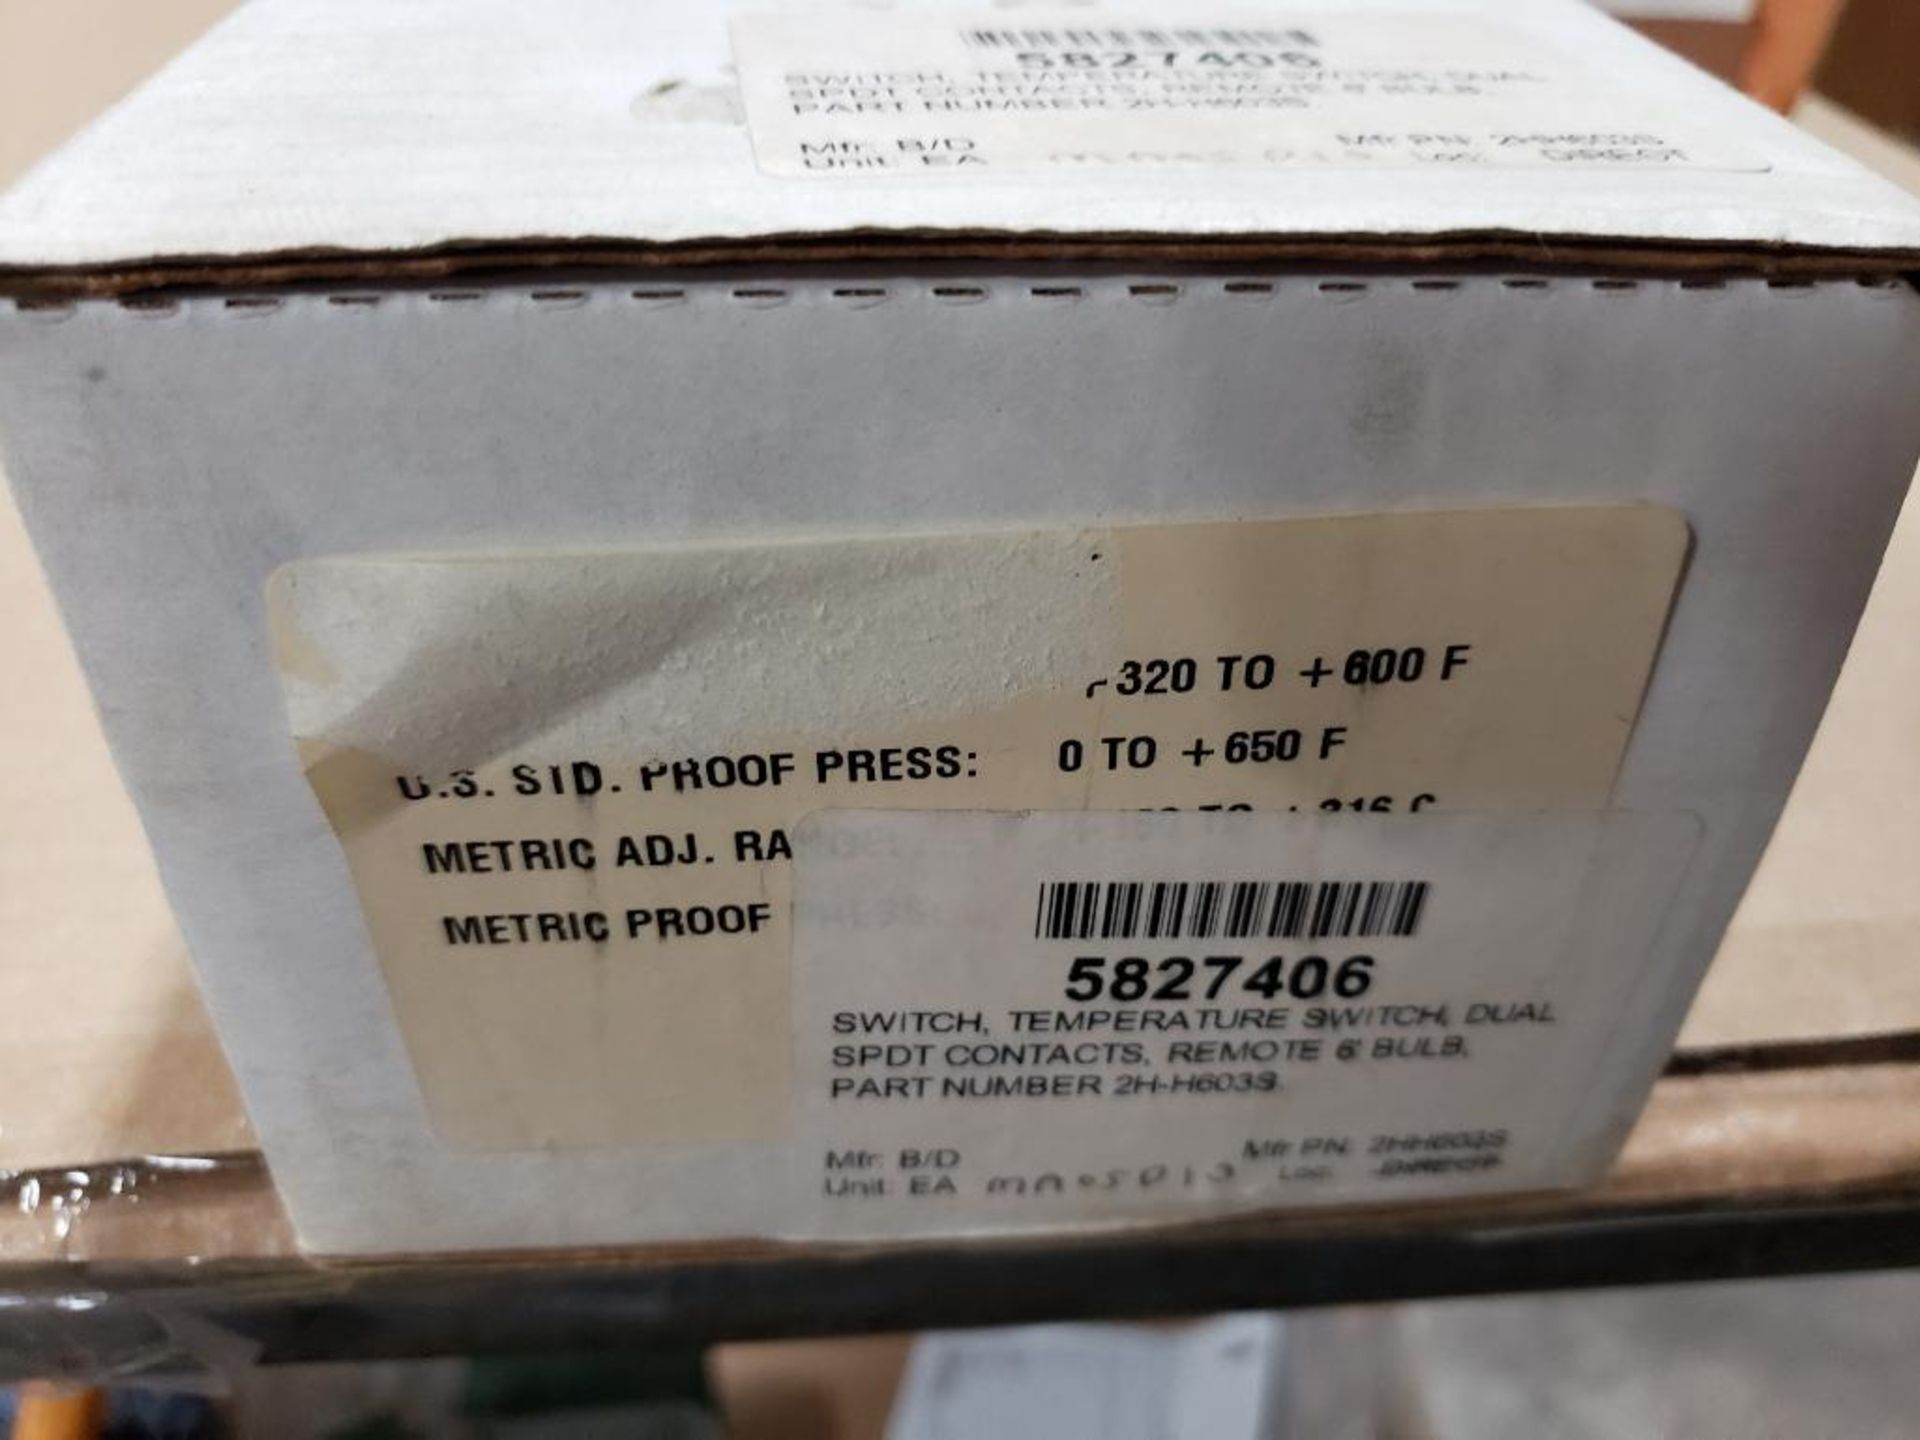 Barksdale 5827406 temperature switch. New in box.